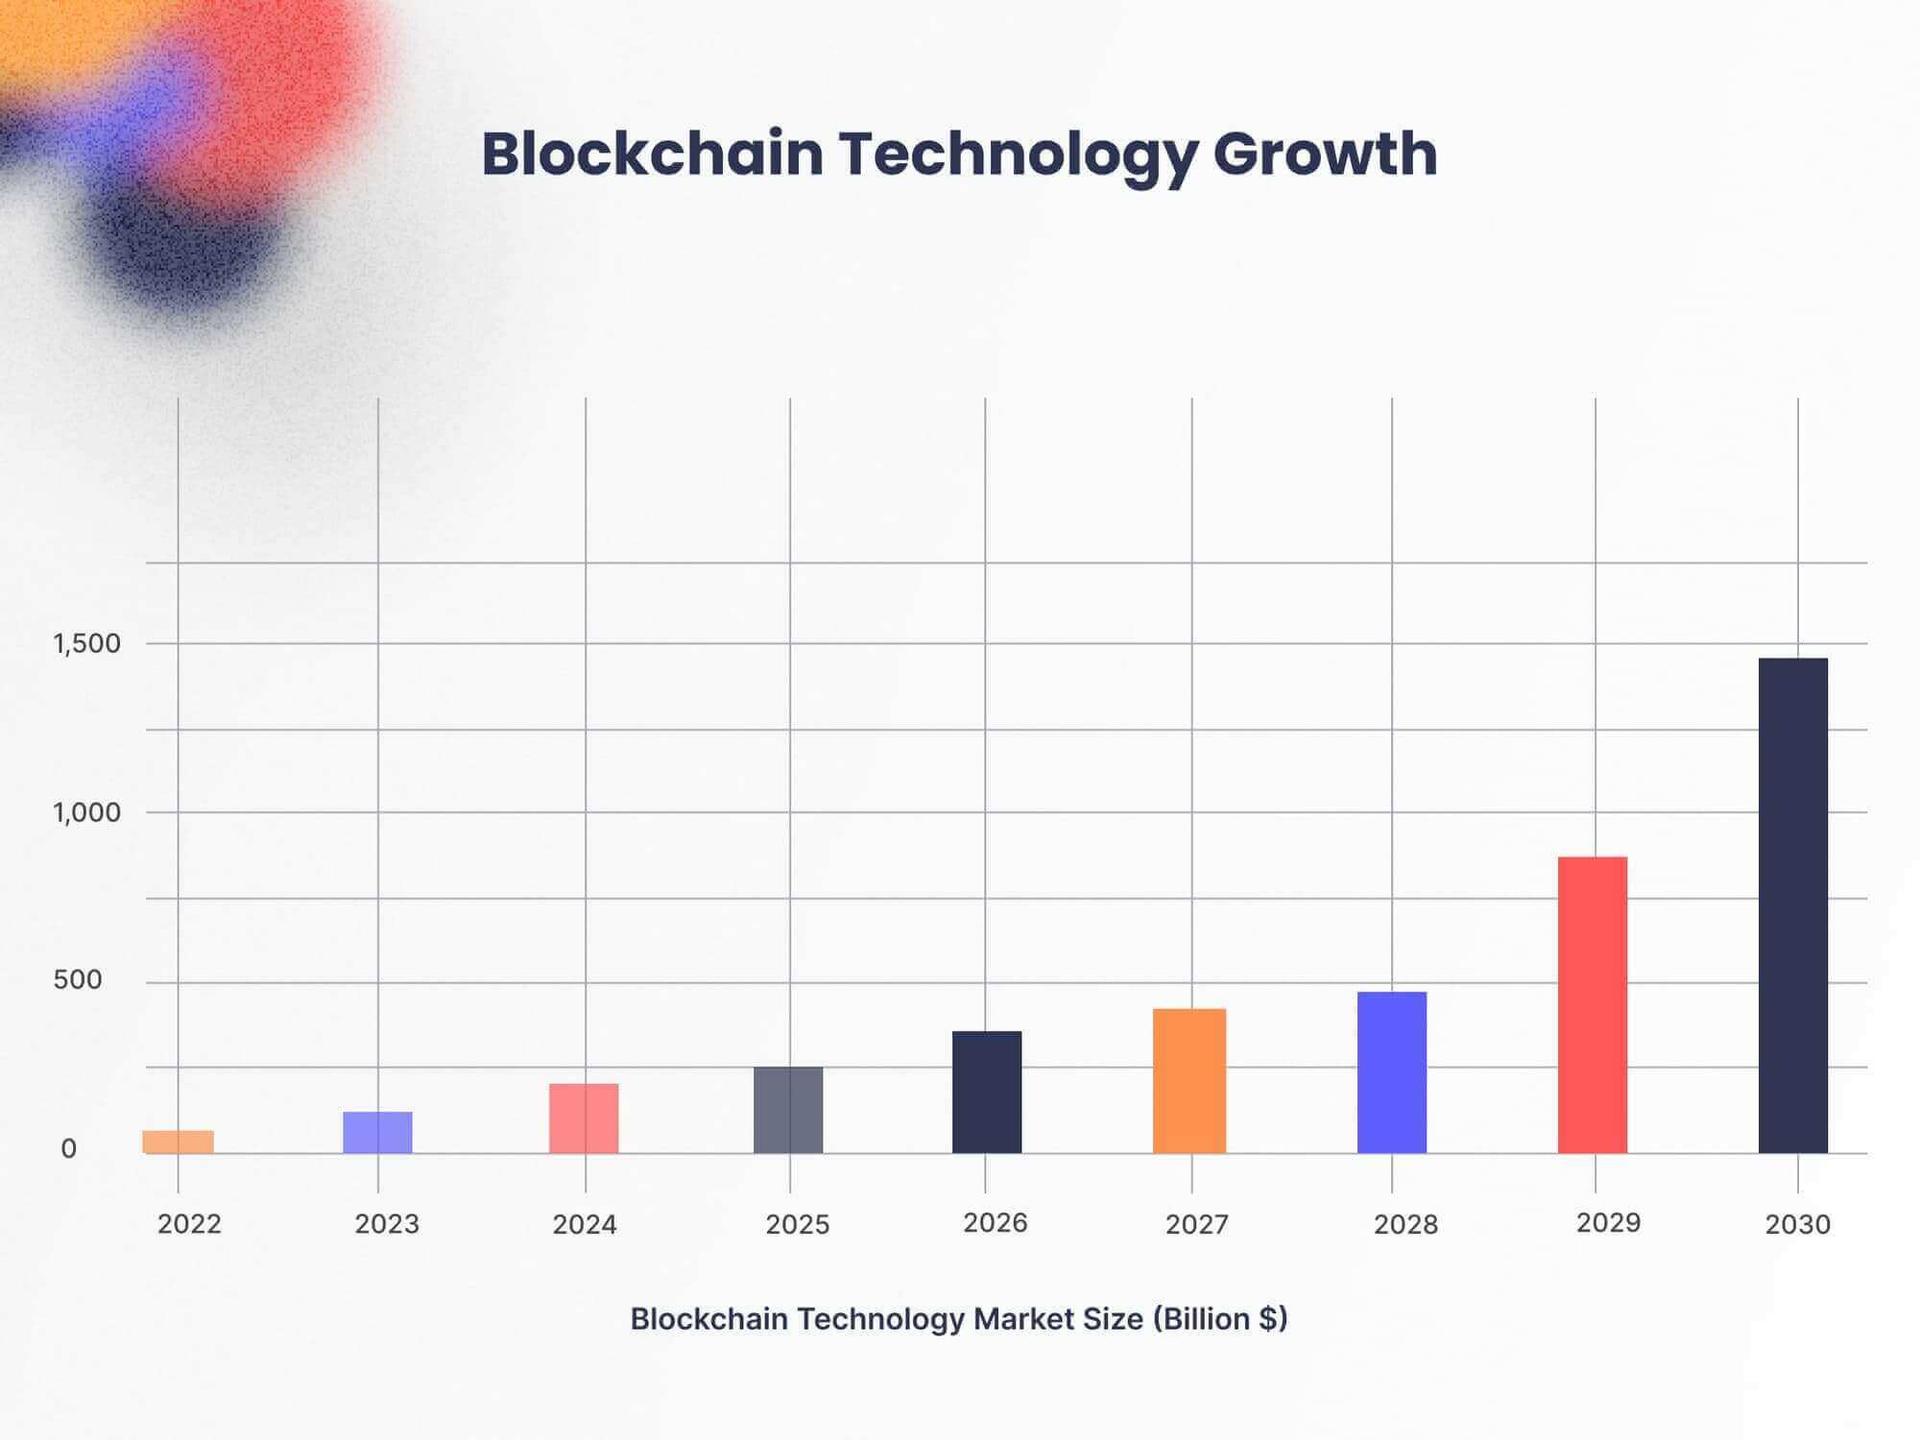 Bar graph displaying the growth of blockchain technology between 2022 and 2030 in billion-dollar increments.